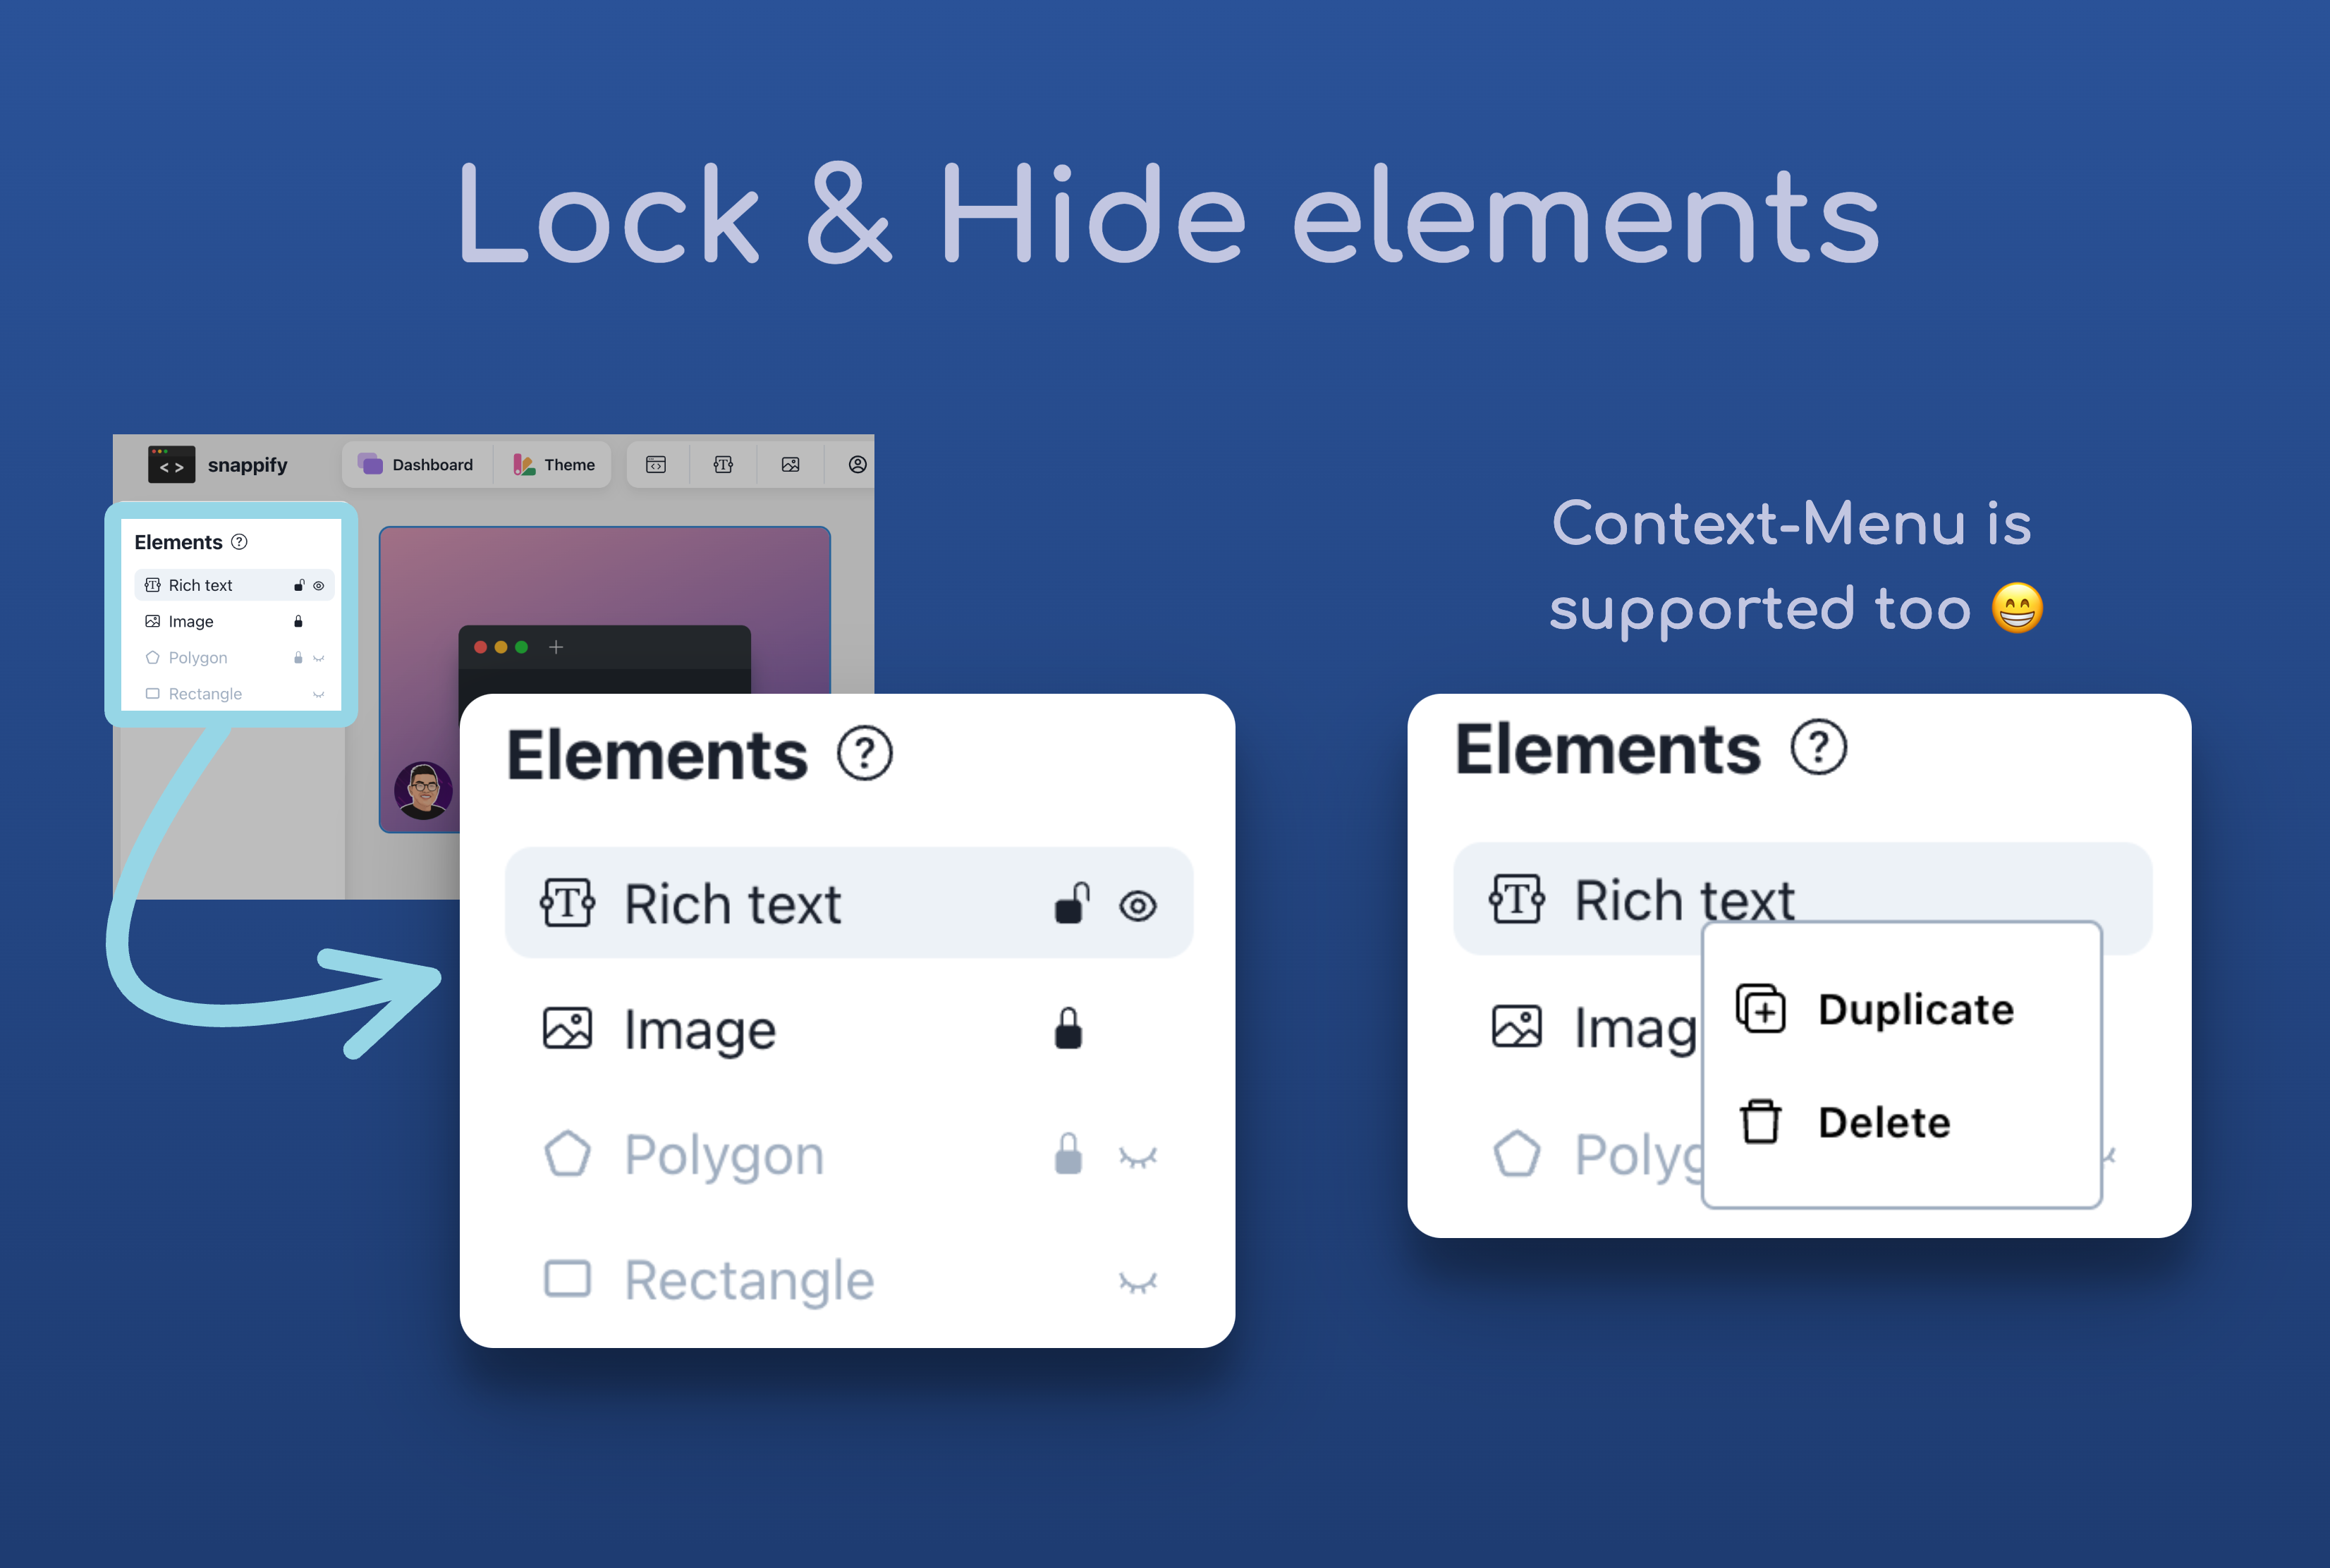 Promotion Image showcasing the new lock & hide element feature